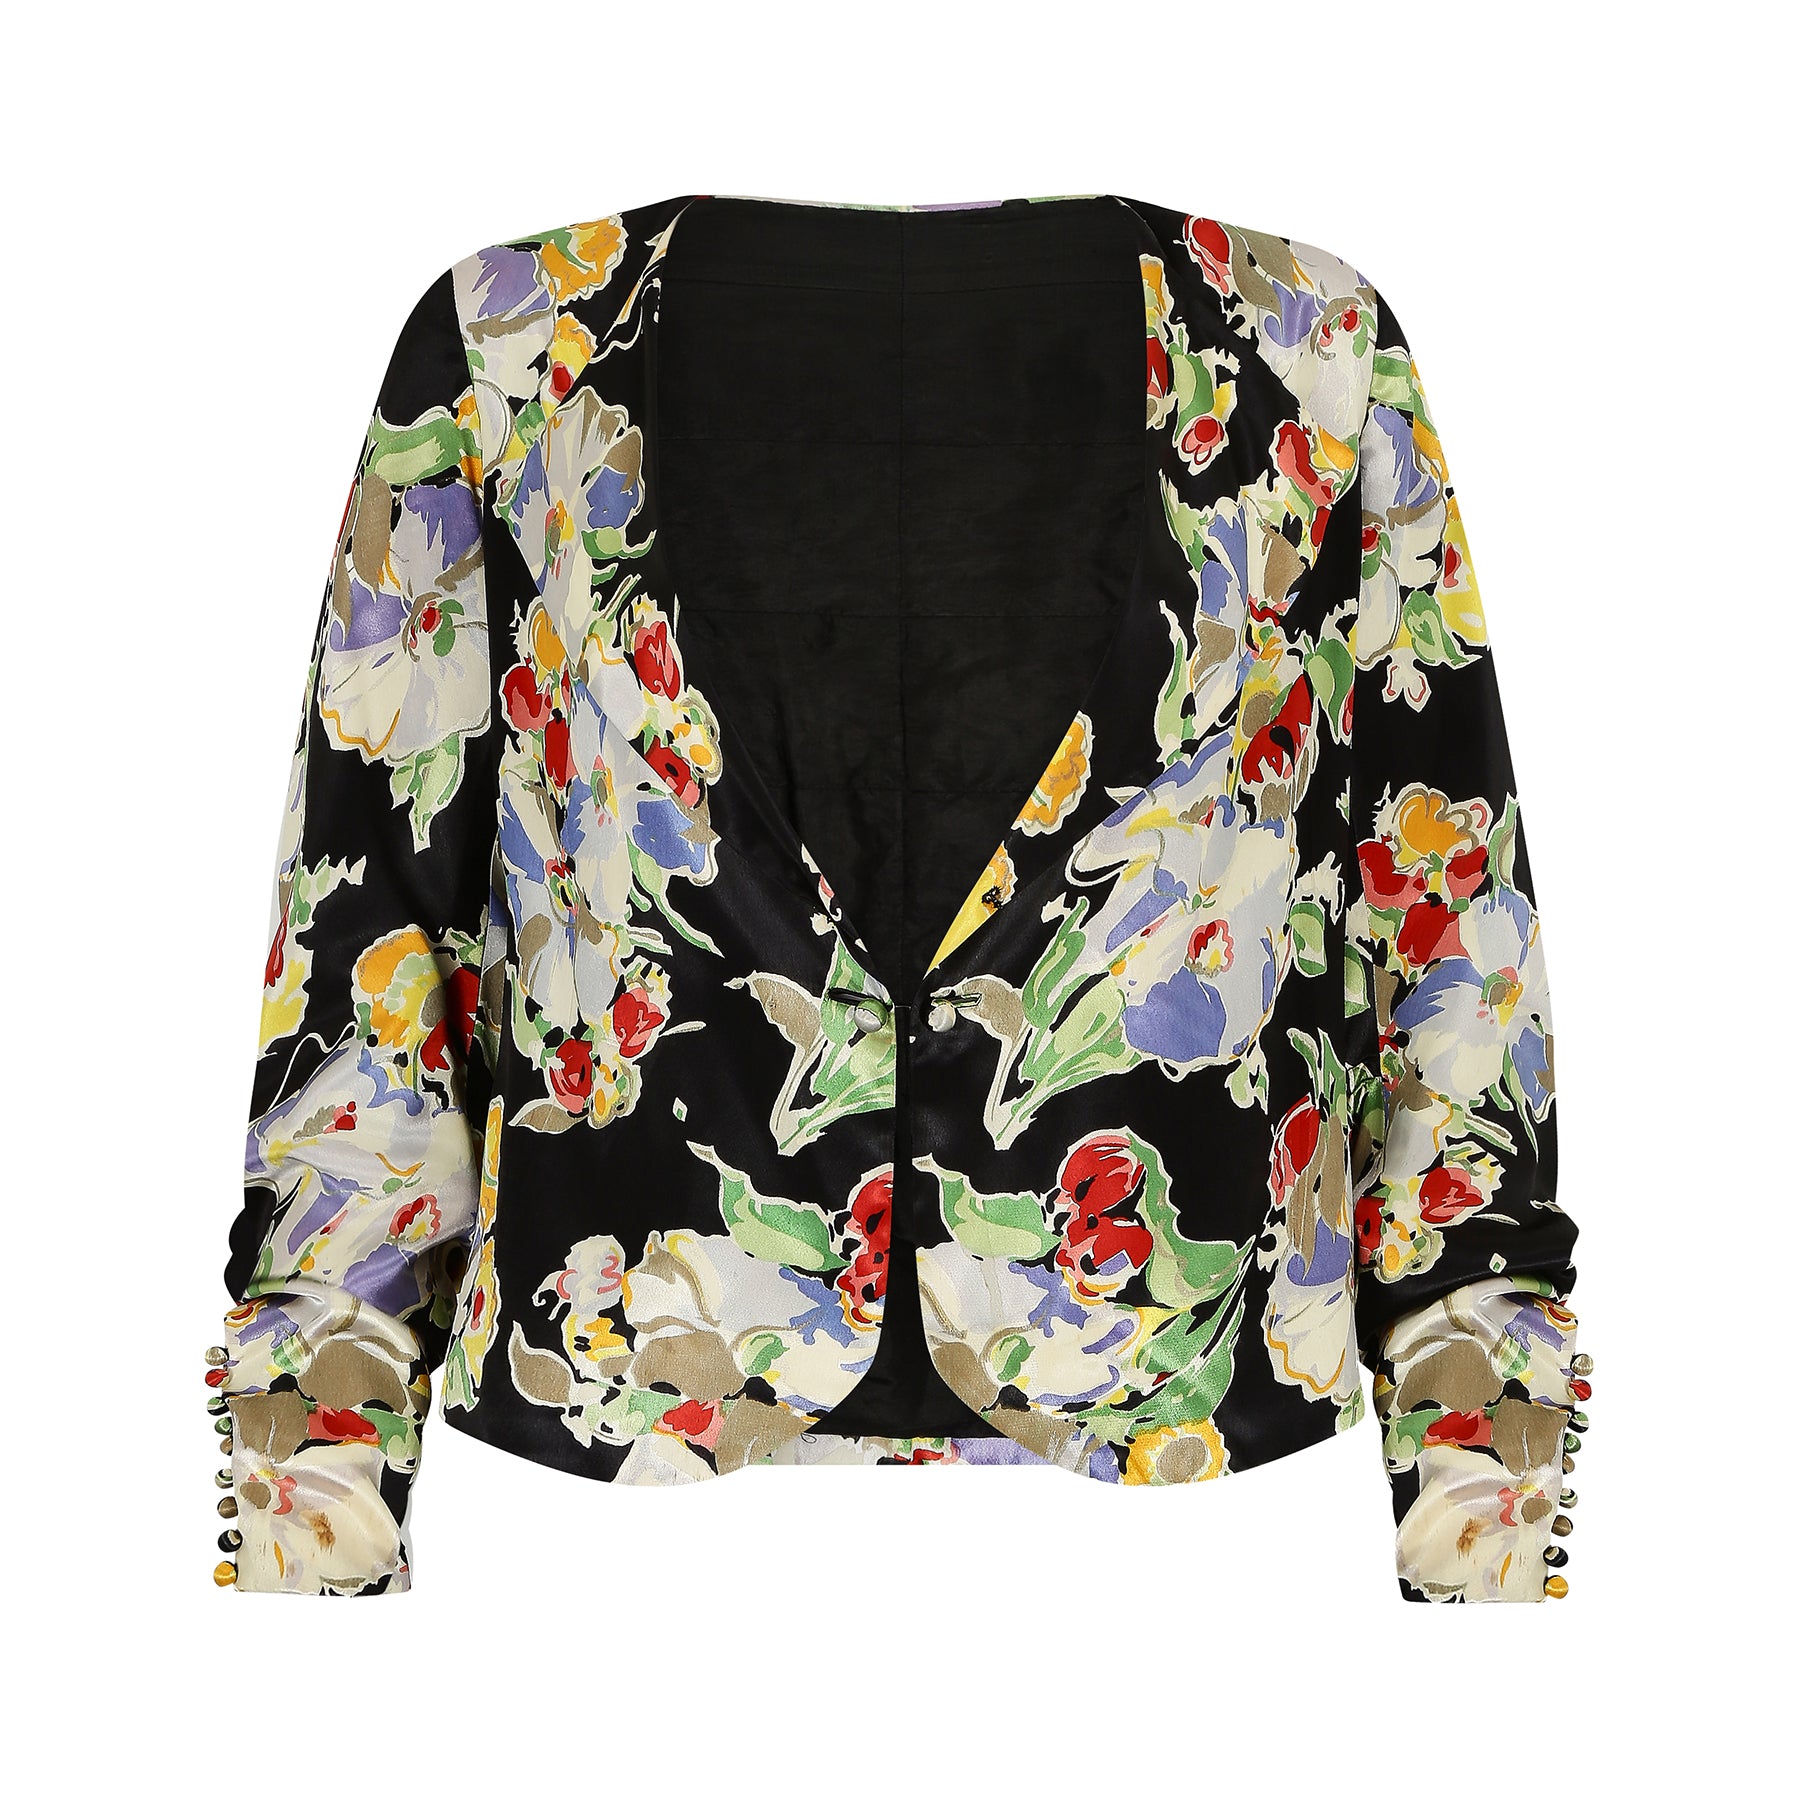 1930s Floral Satin Jacket with Buttoned Cuffs